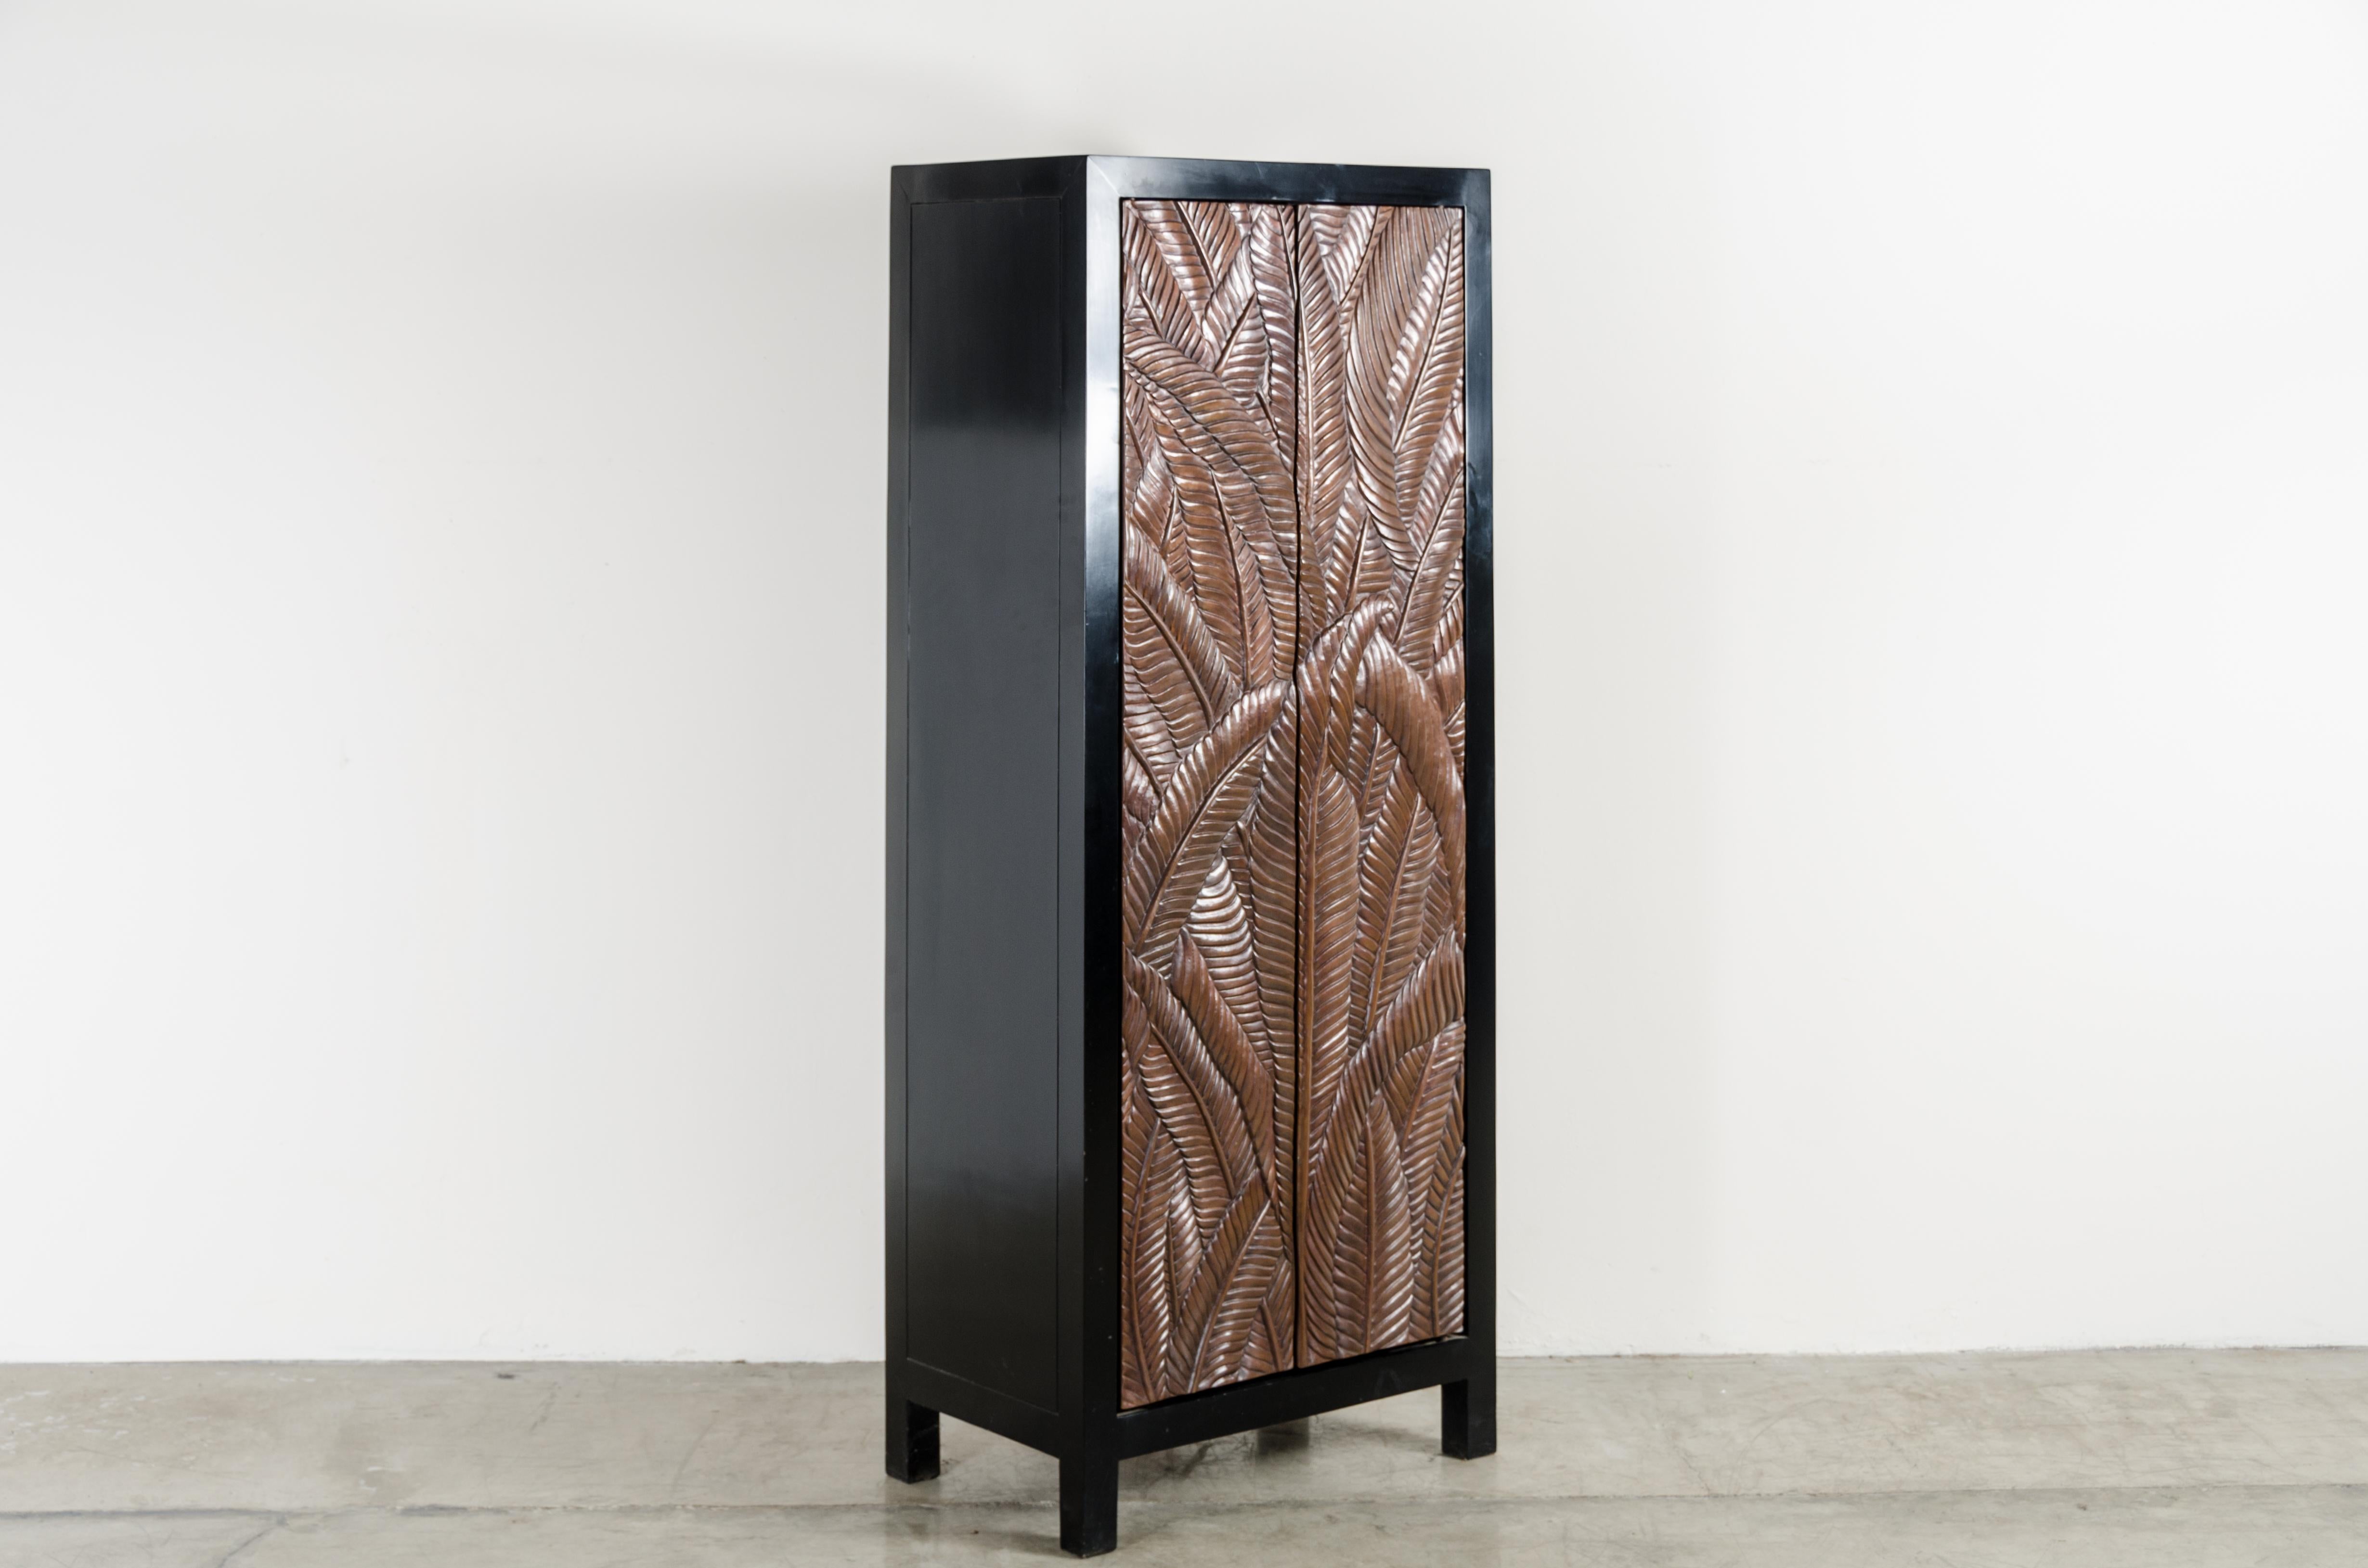 Banana leaf design narrow cabinet
Antique copper
Hand repousse
Limited Edition
Each piece is individually crafted and is unique.

Lacquer is a technique that dates back to the Shang dynasty, circa 1600-1100 B.C. The pieces are made with at